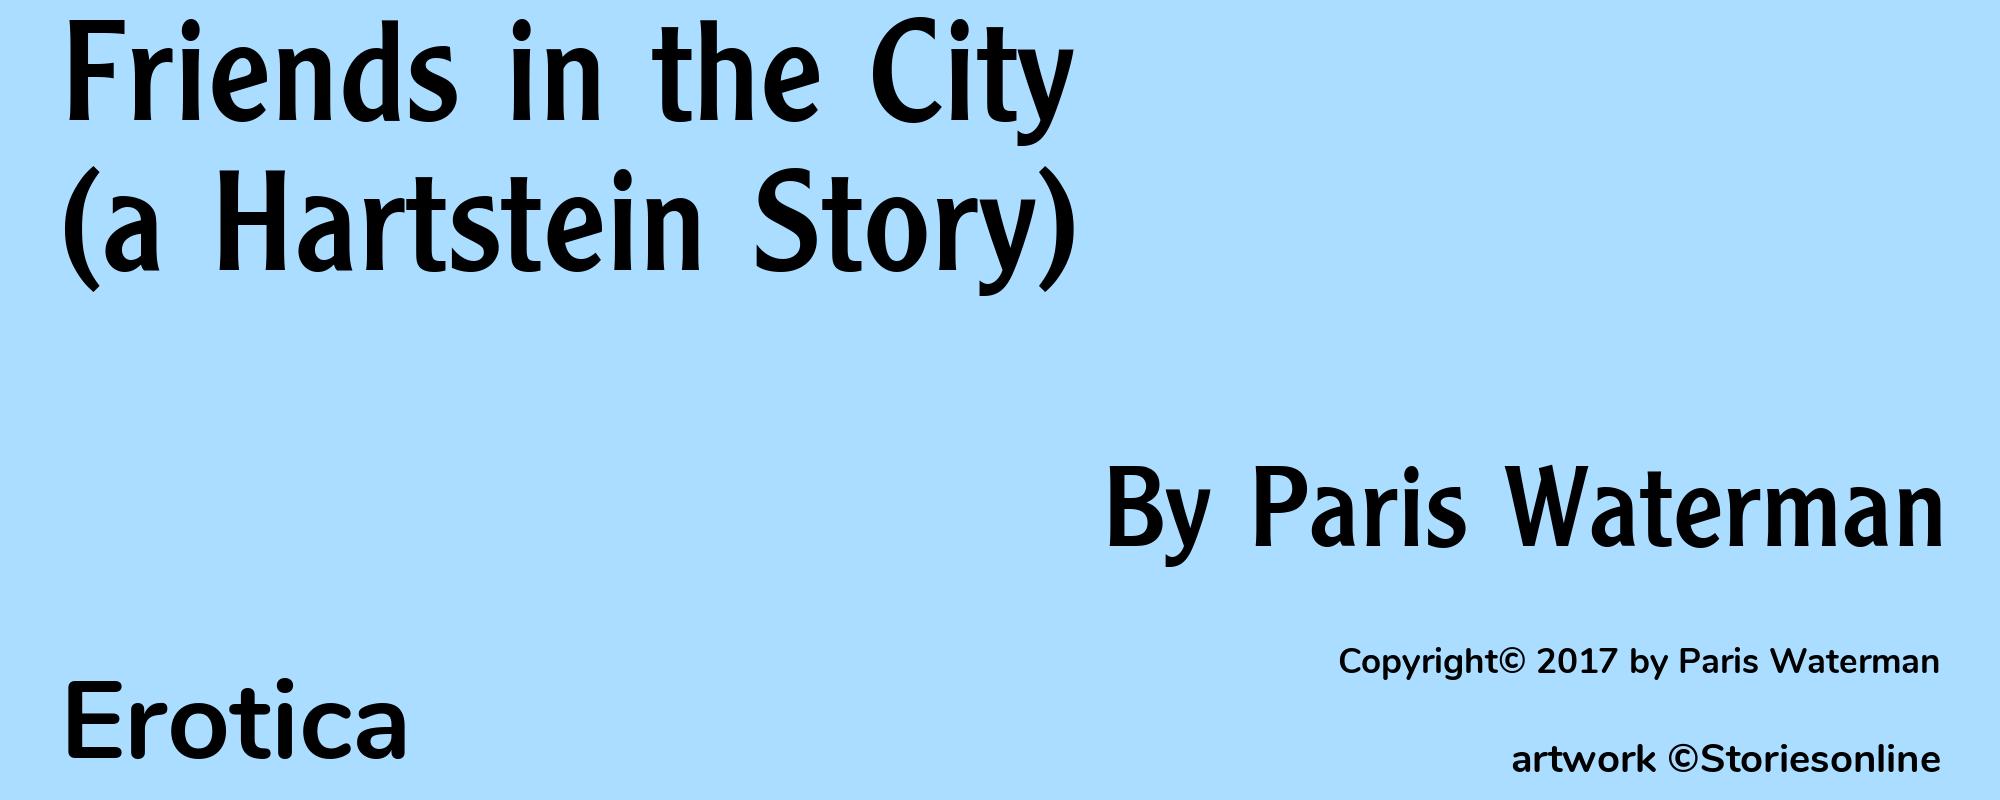 Friends in the City (a Hartstein Story) - Cover